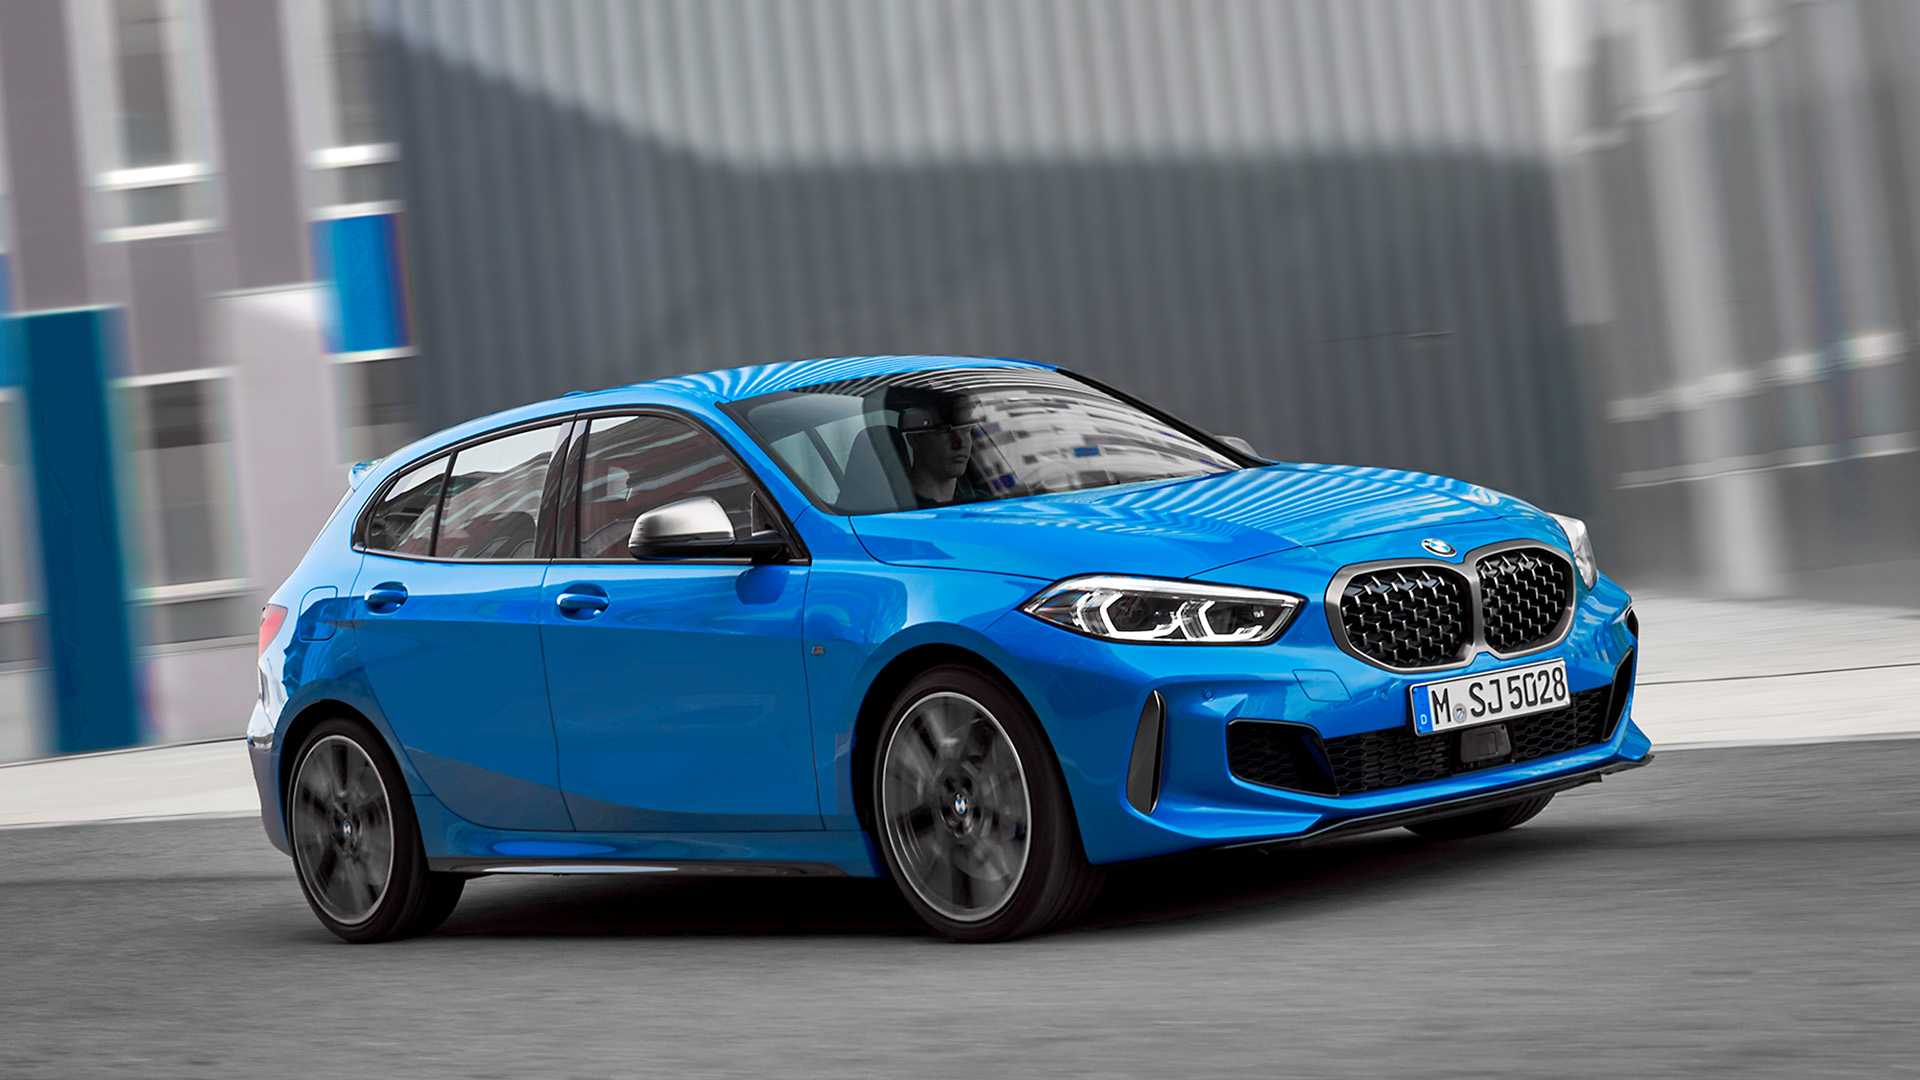 2020 BMW 1 Series Hatchback Debuts With 2.0-liter Turbo Engine In M135i